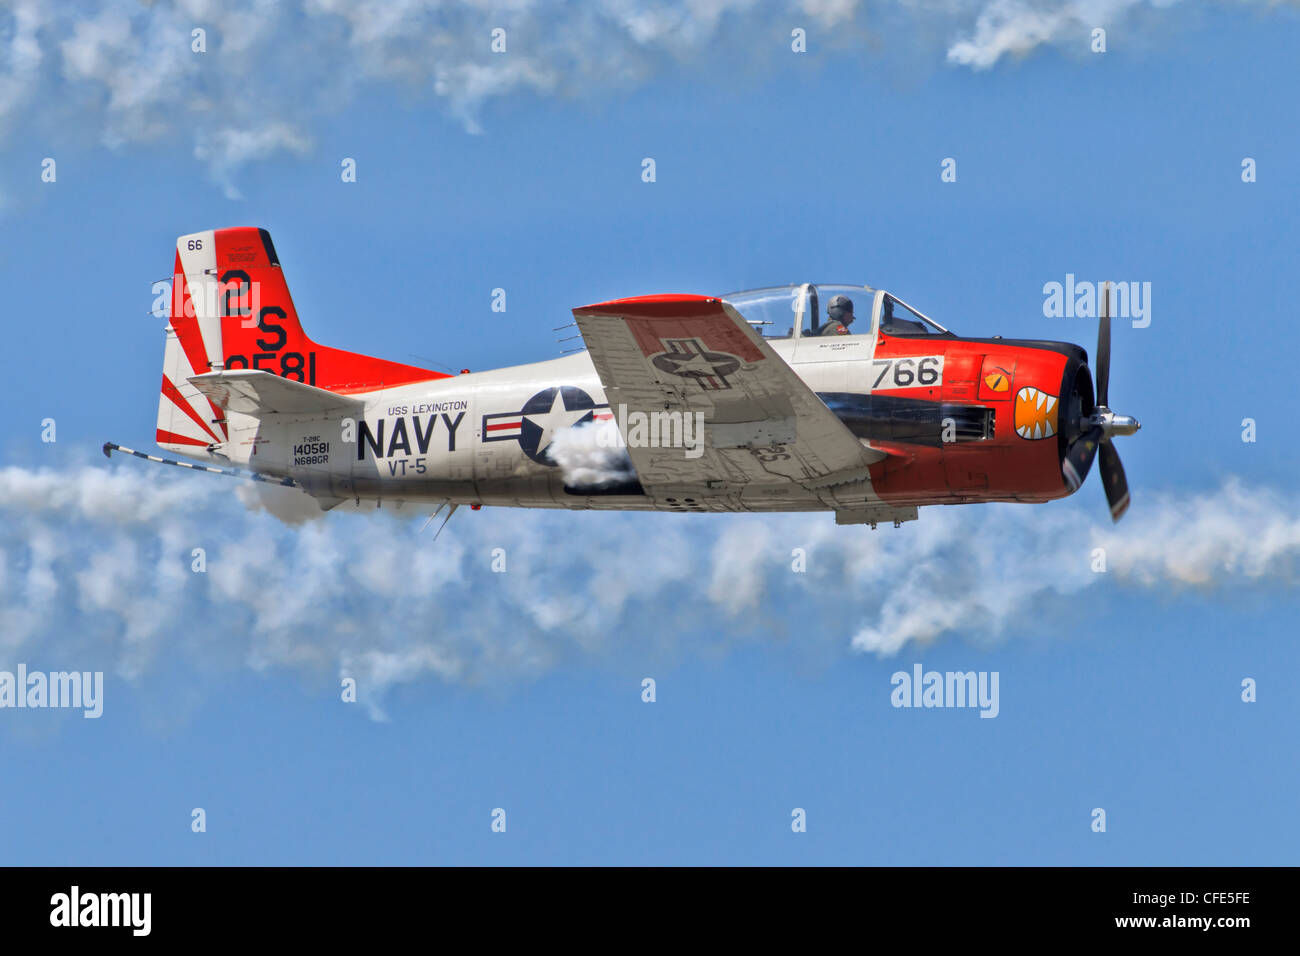 North American T28 Trojan aircraft of the US Navy Stock Photo